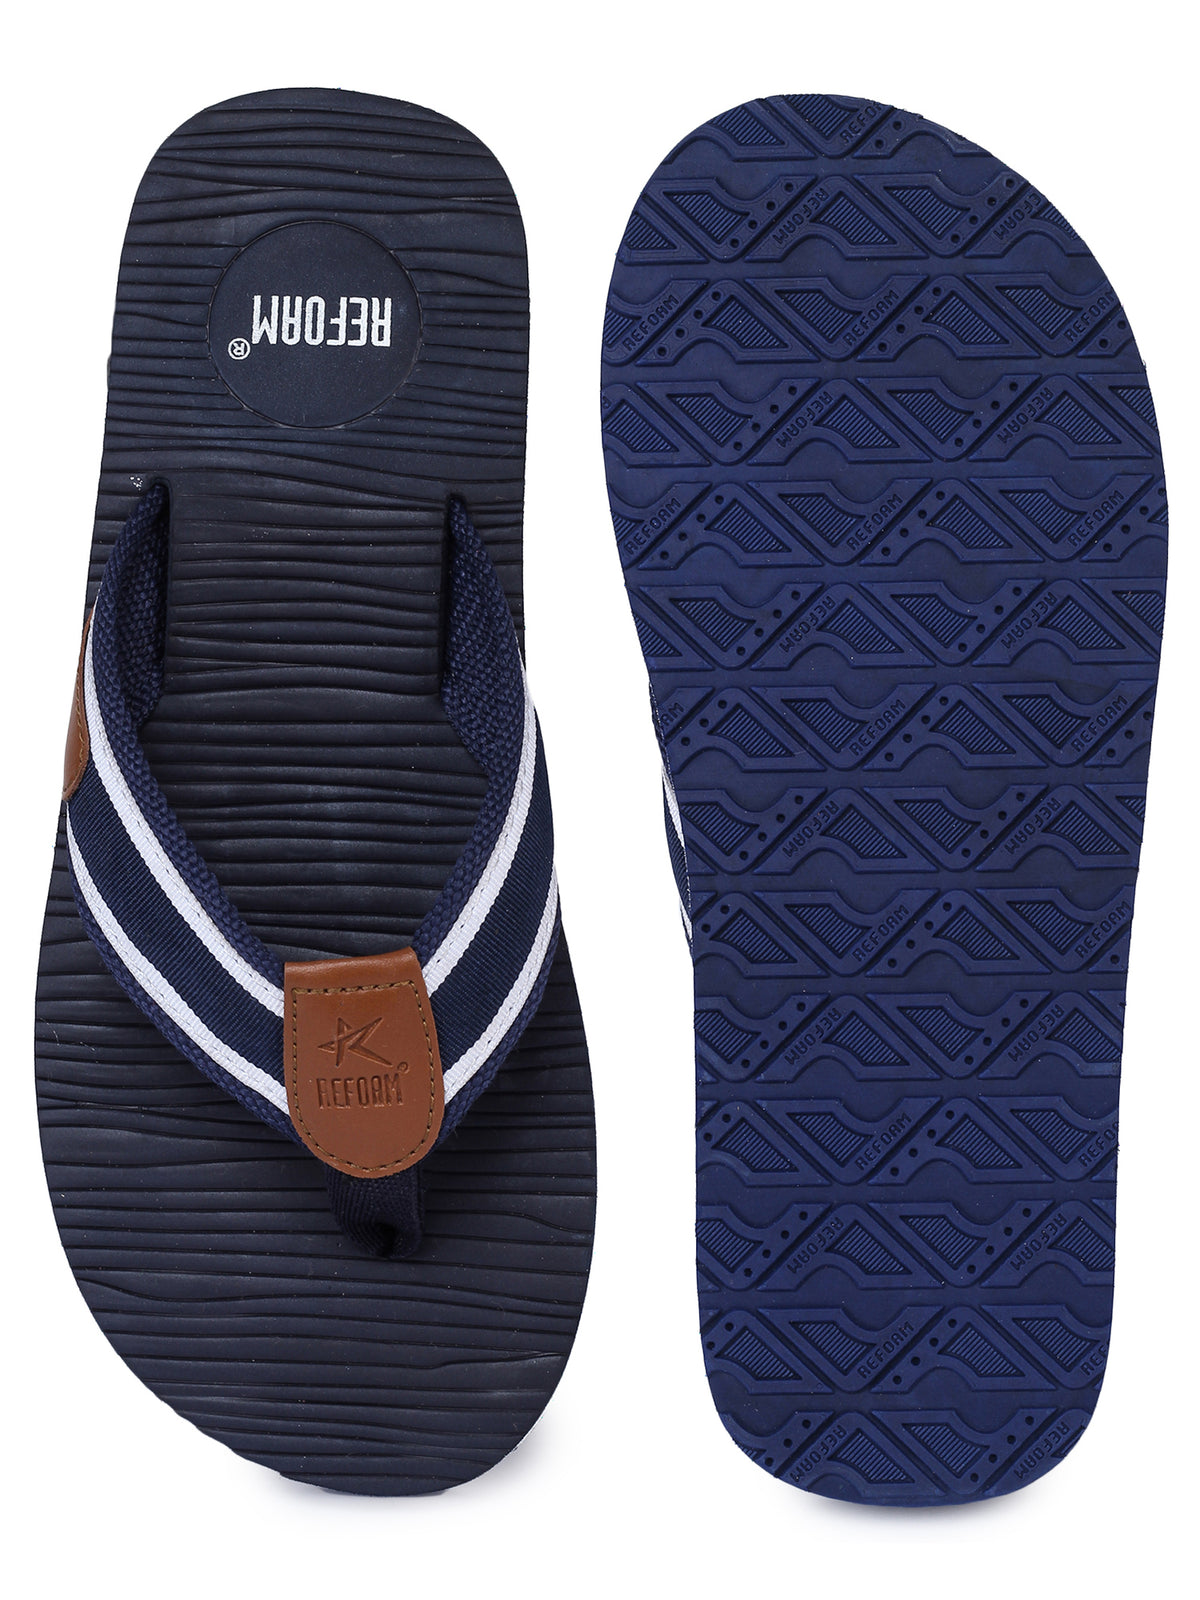 Navy Blue Solid Rubber Slip On Casual Slippers For Men